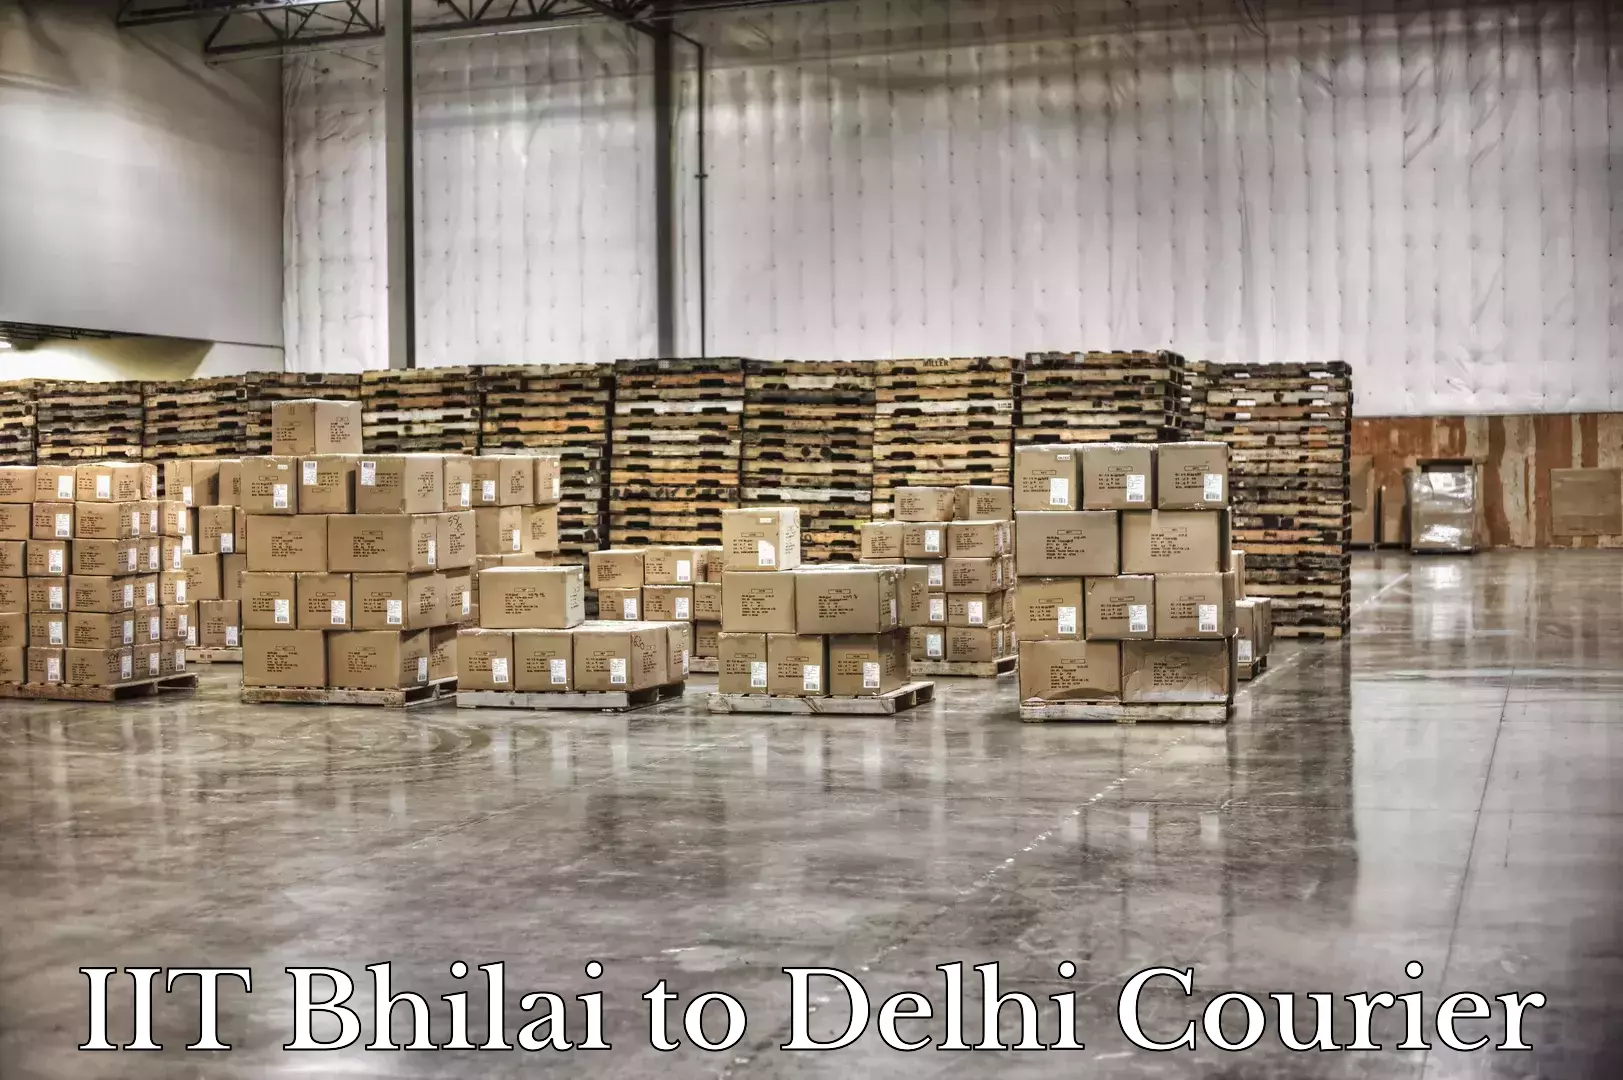 Luggage shipment specialists IIT Bhilai to NCR